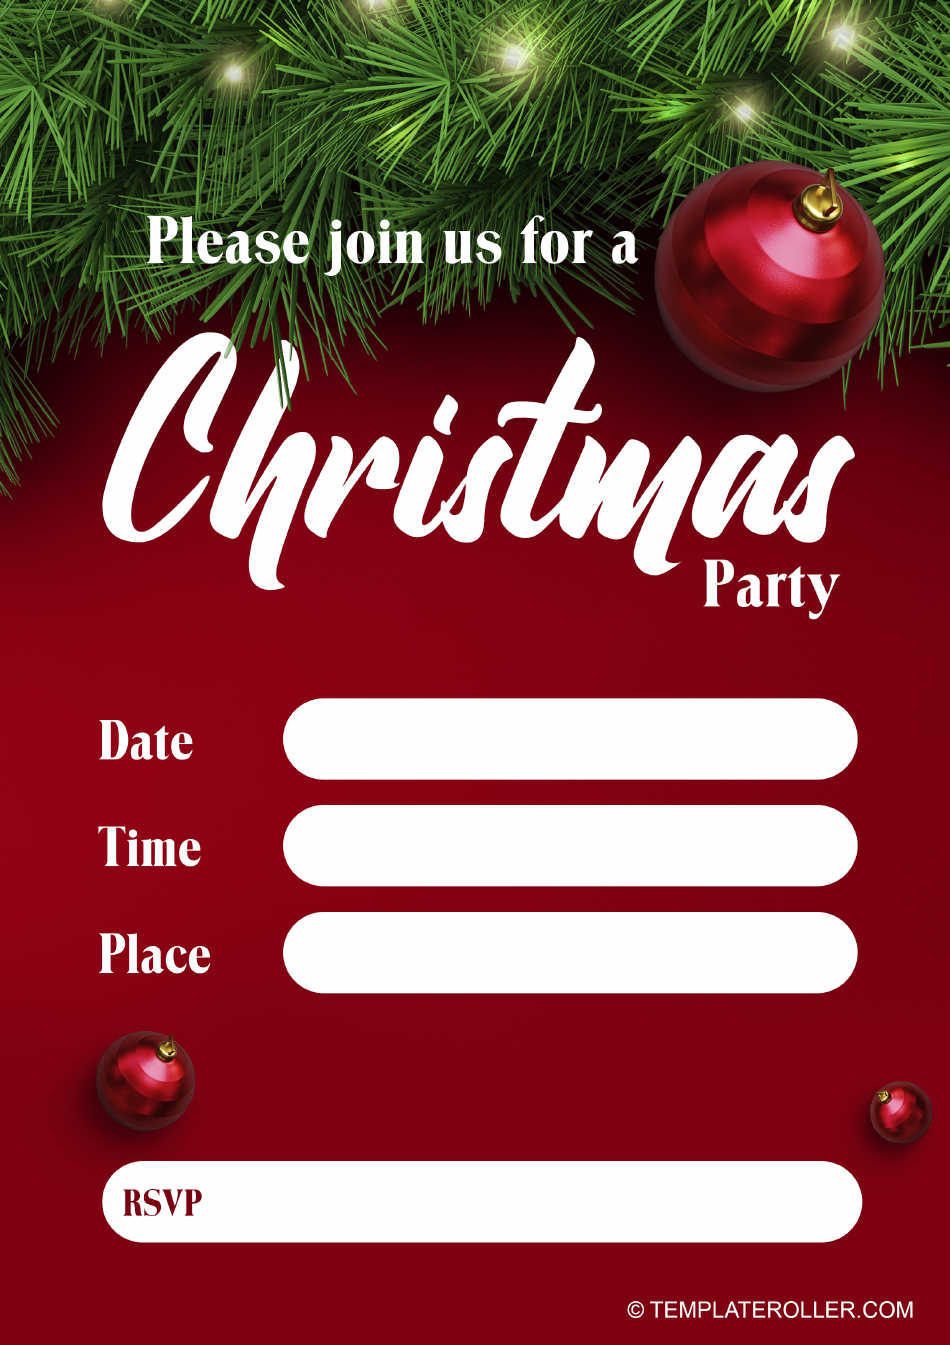 Christmas Invitation Template in Red